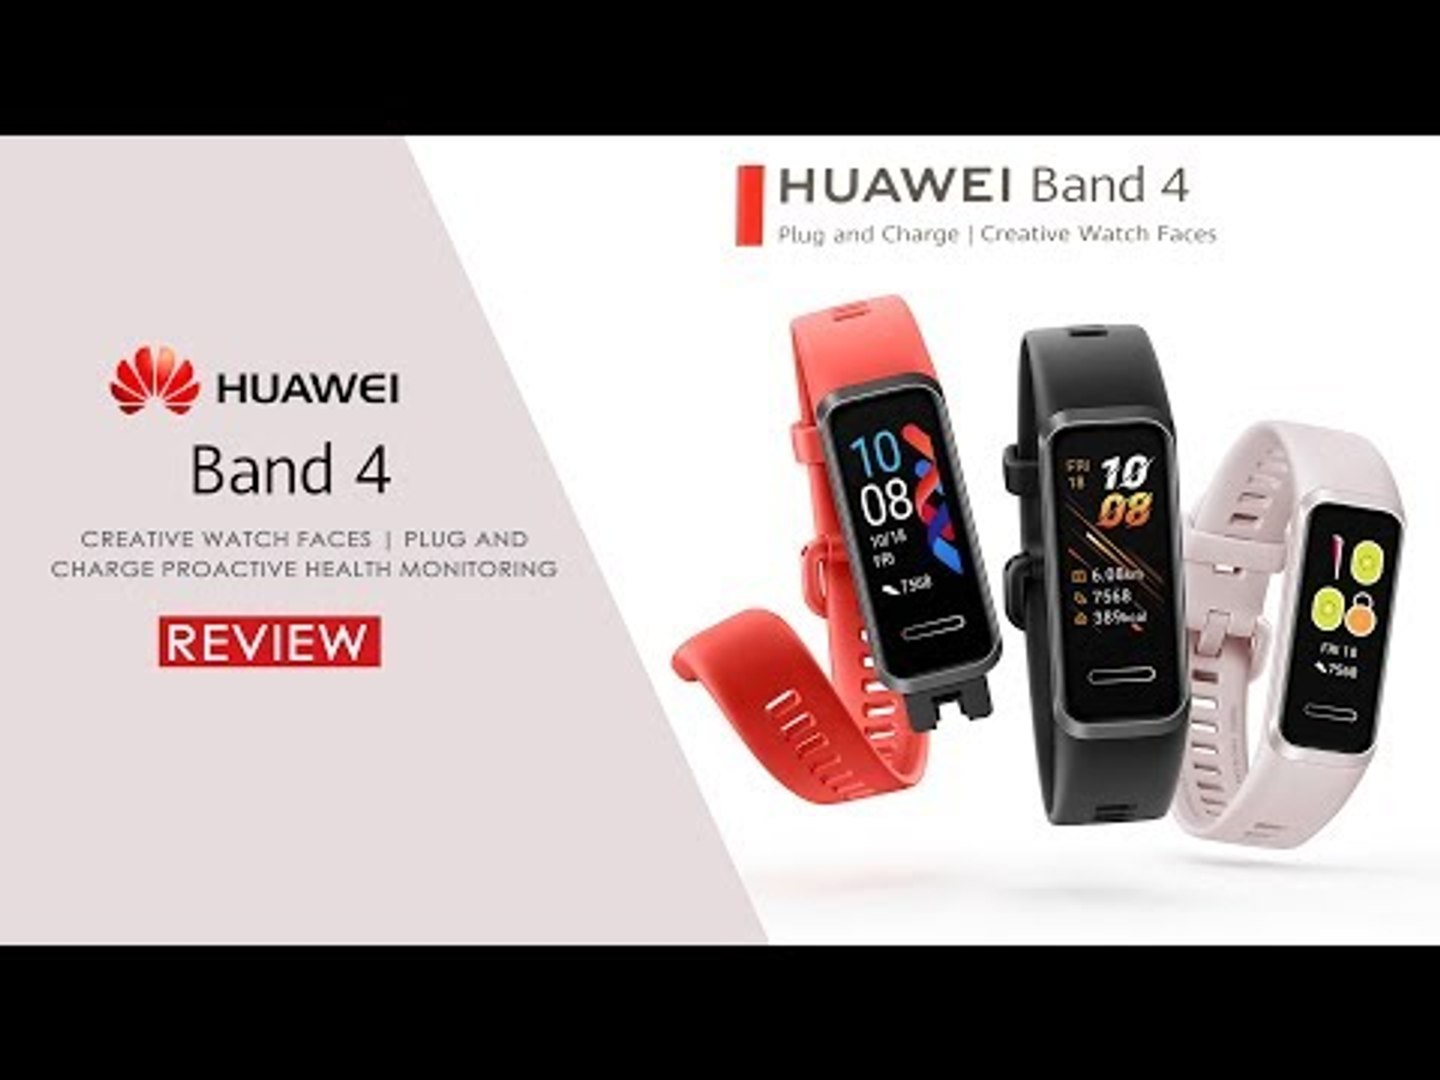 Huawei Band 4 Review | How to Setup Huawei Band 4 With Smartphone - video  Dailymotion